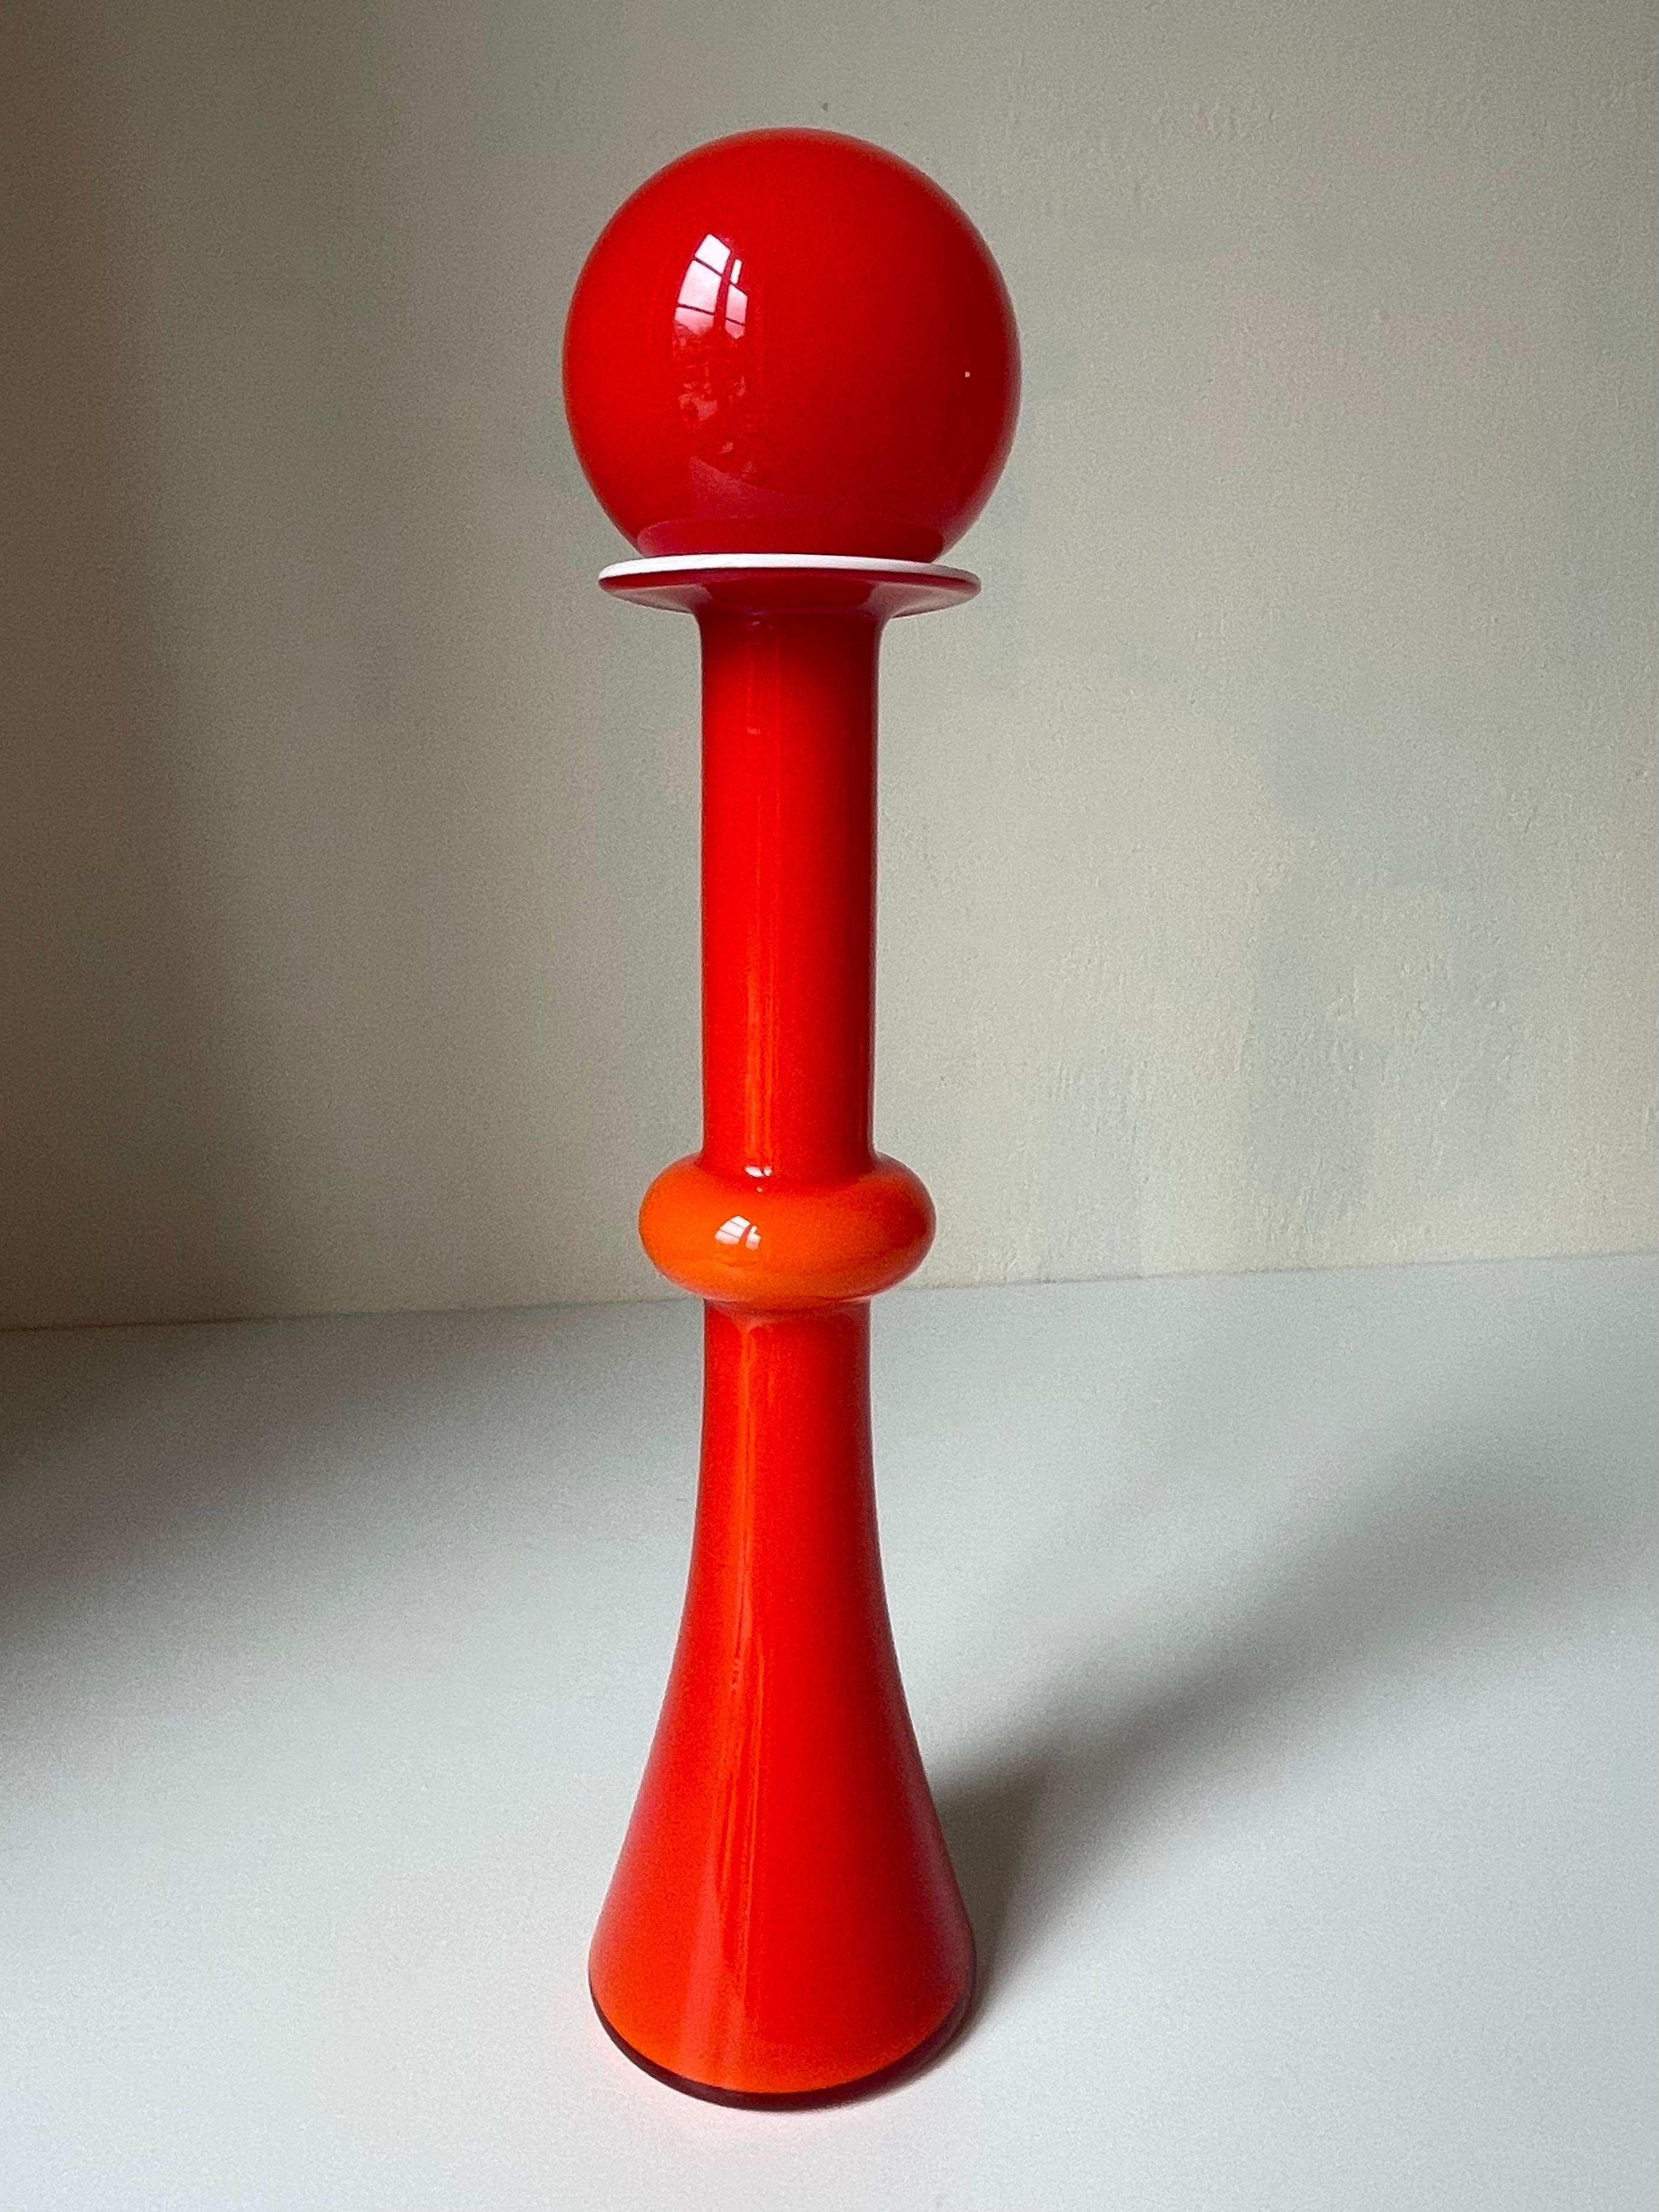 Hand-Crafted Holmegaard 1968 Red Pop Art Glass Vase with Globe, Denmark For Sale